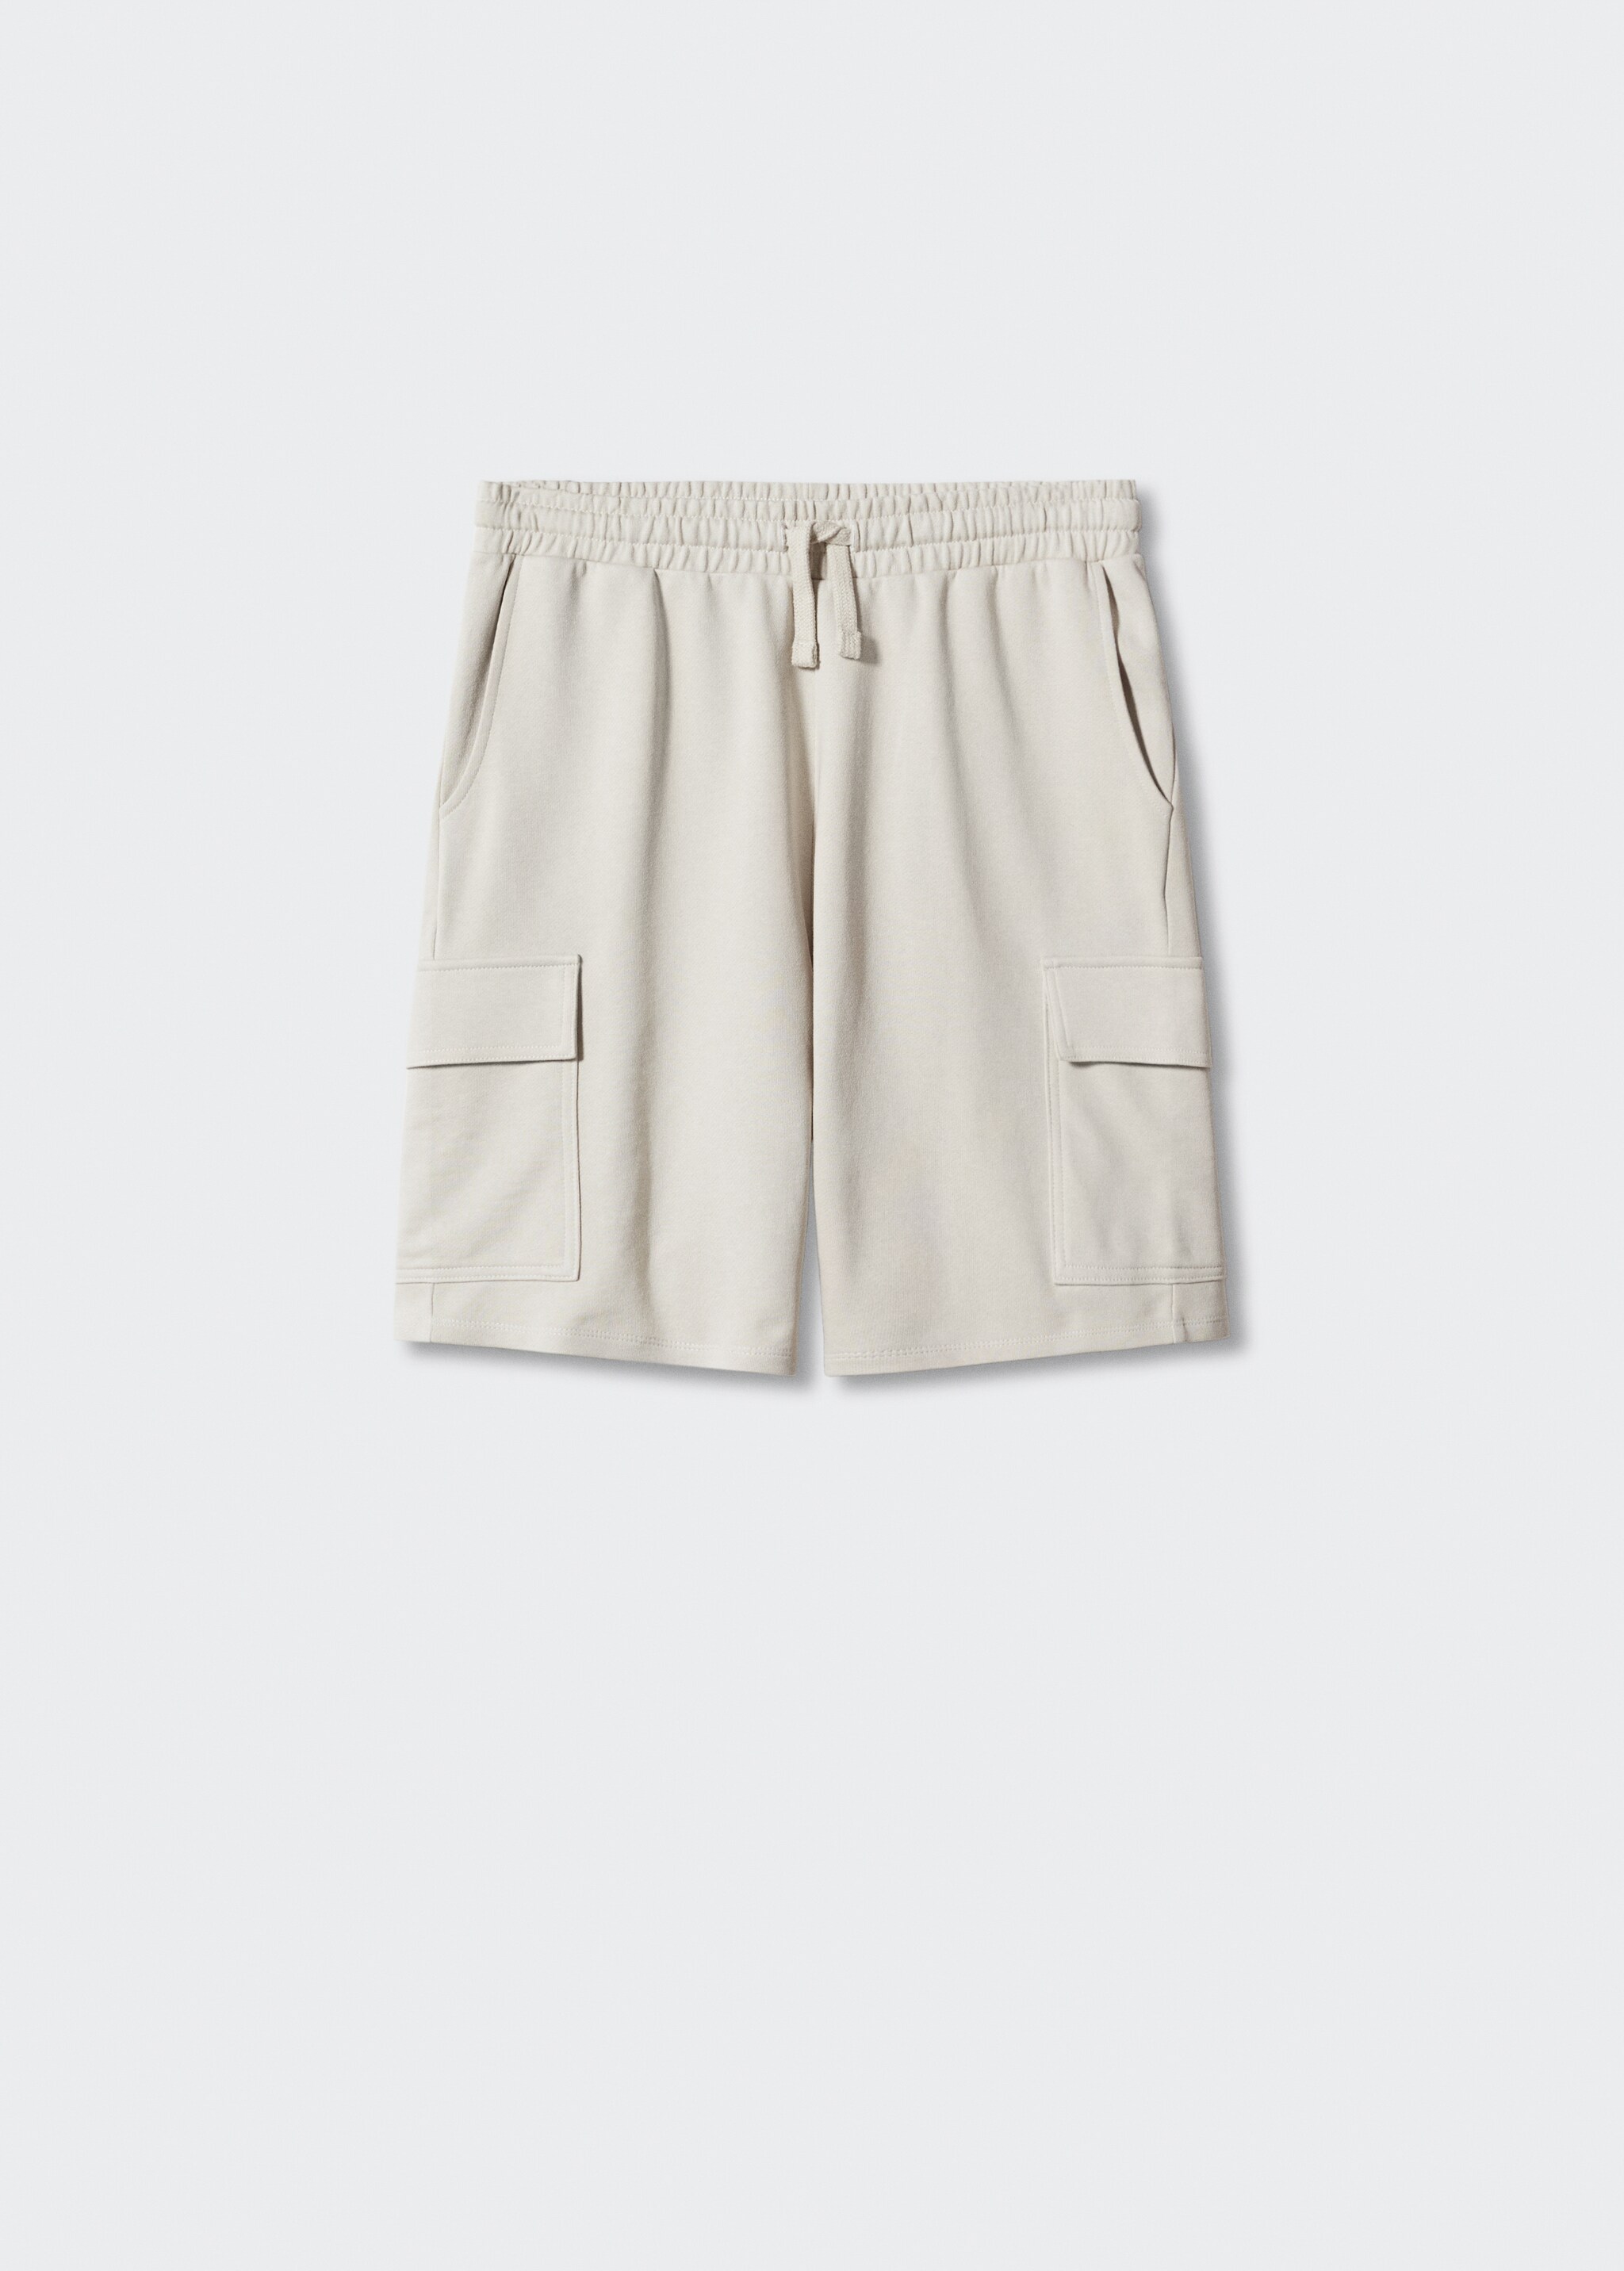 Cargo Bermuda shorts - Article without model